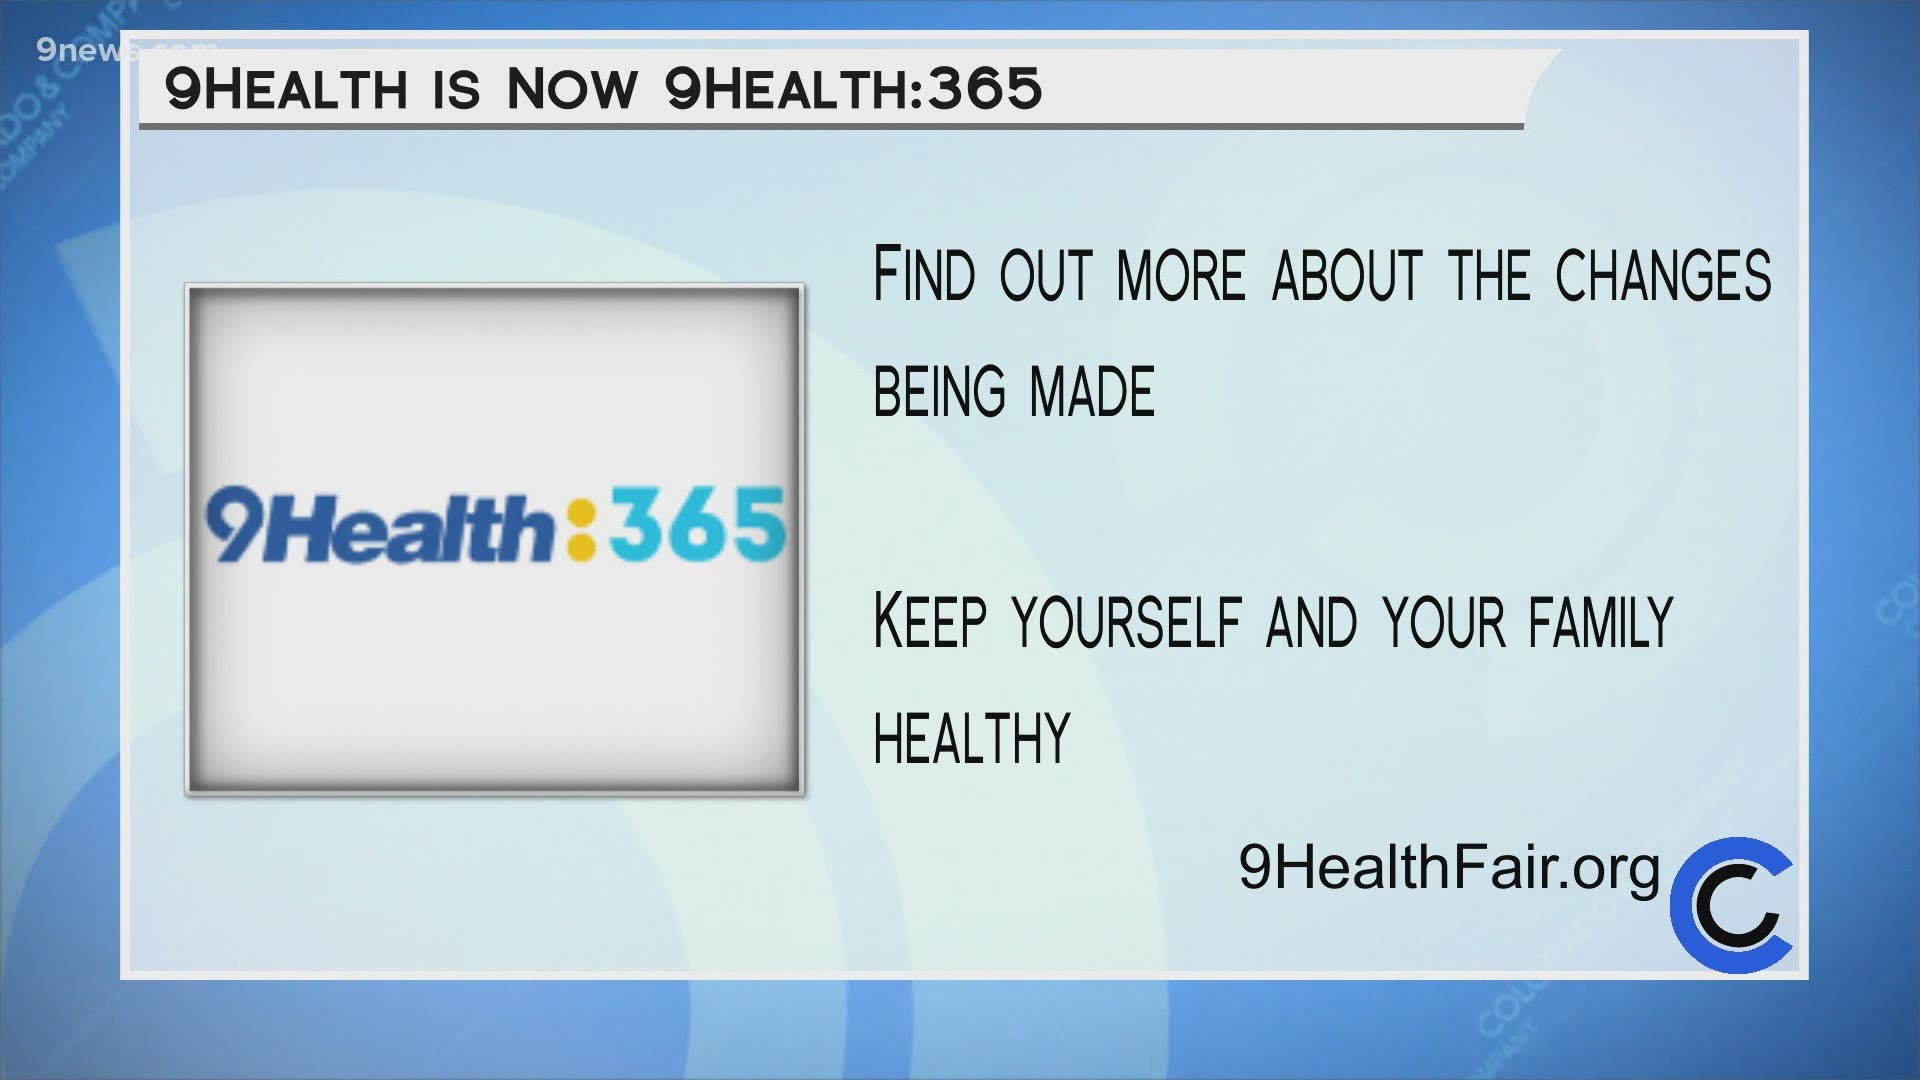 9Health is now 9Health 365. Learn more about new changes and additions to care at 9HealthFair.org.